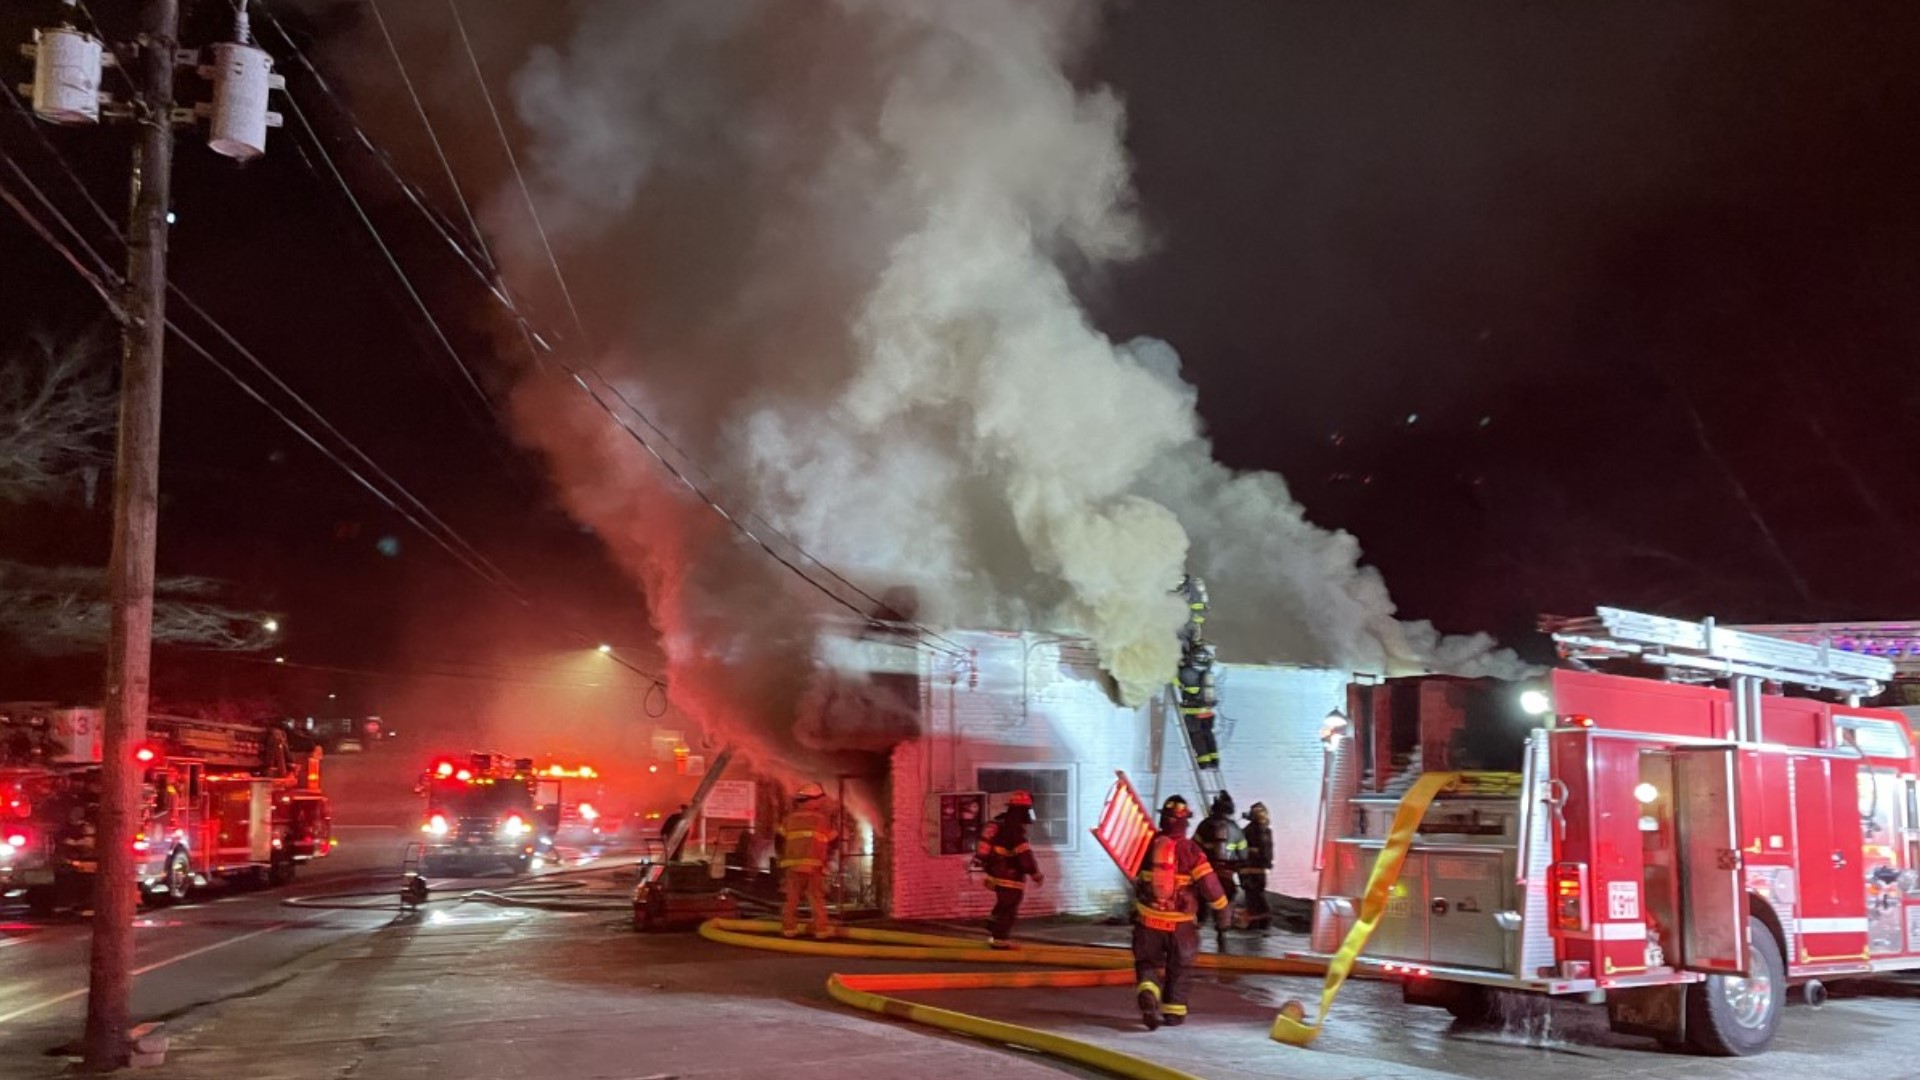 The Knoxville Fire Department said it responded to a vacant church fire and a vacant house fire on Thursday, March 30, around 1 a.m.